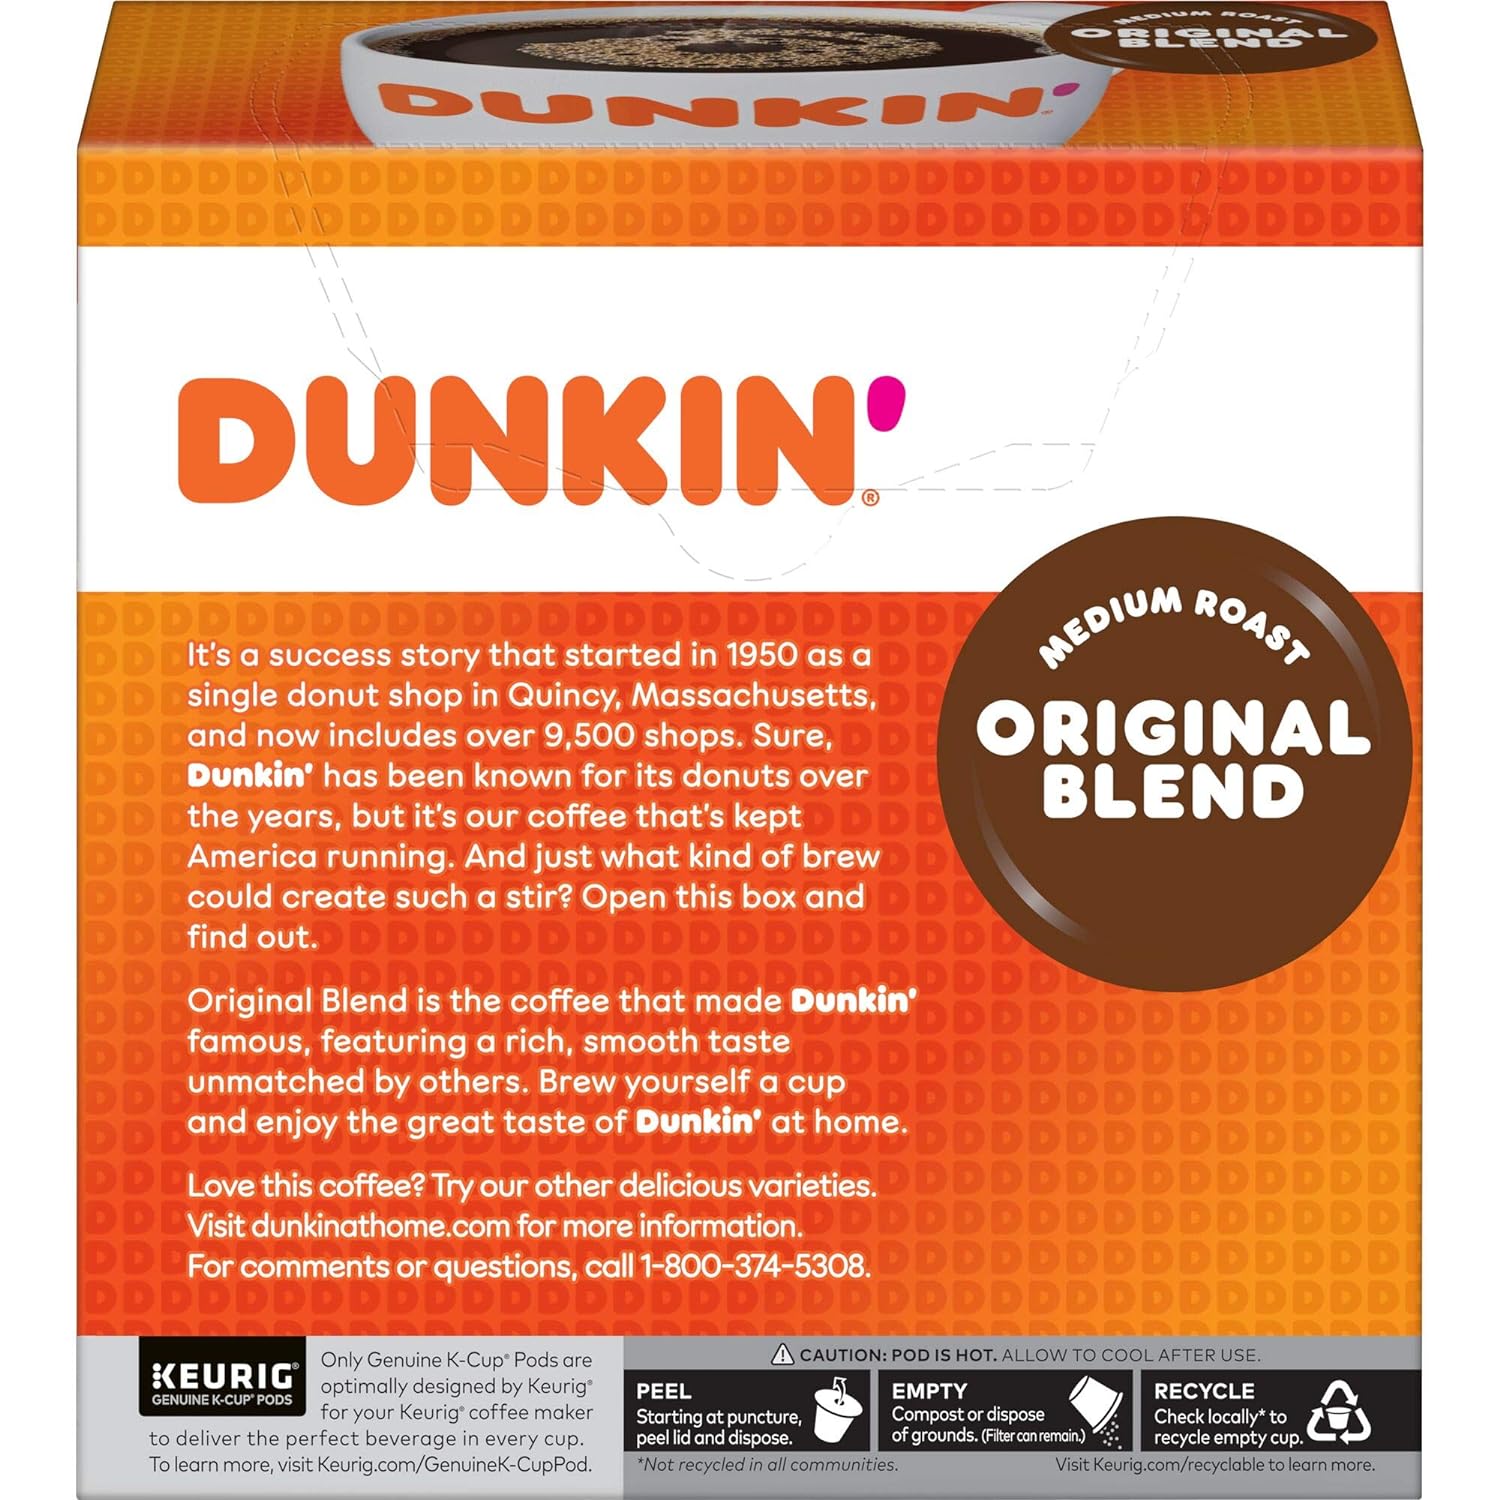 Wholesale prices with free shipping all over United States Dunkin' Original Blend Medium Roast Coffee, 128 Keurig K-Cup Pods - Steven Deals